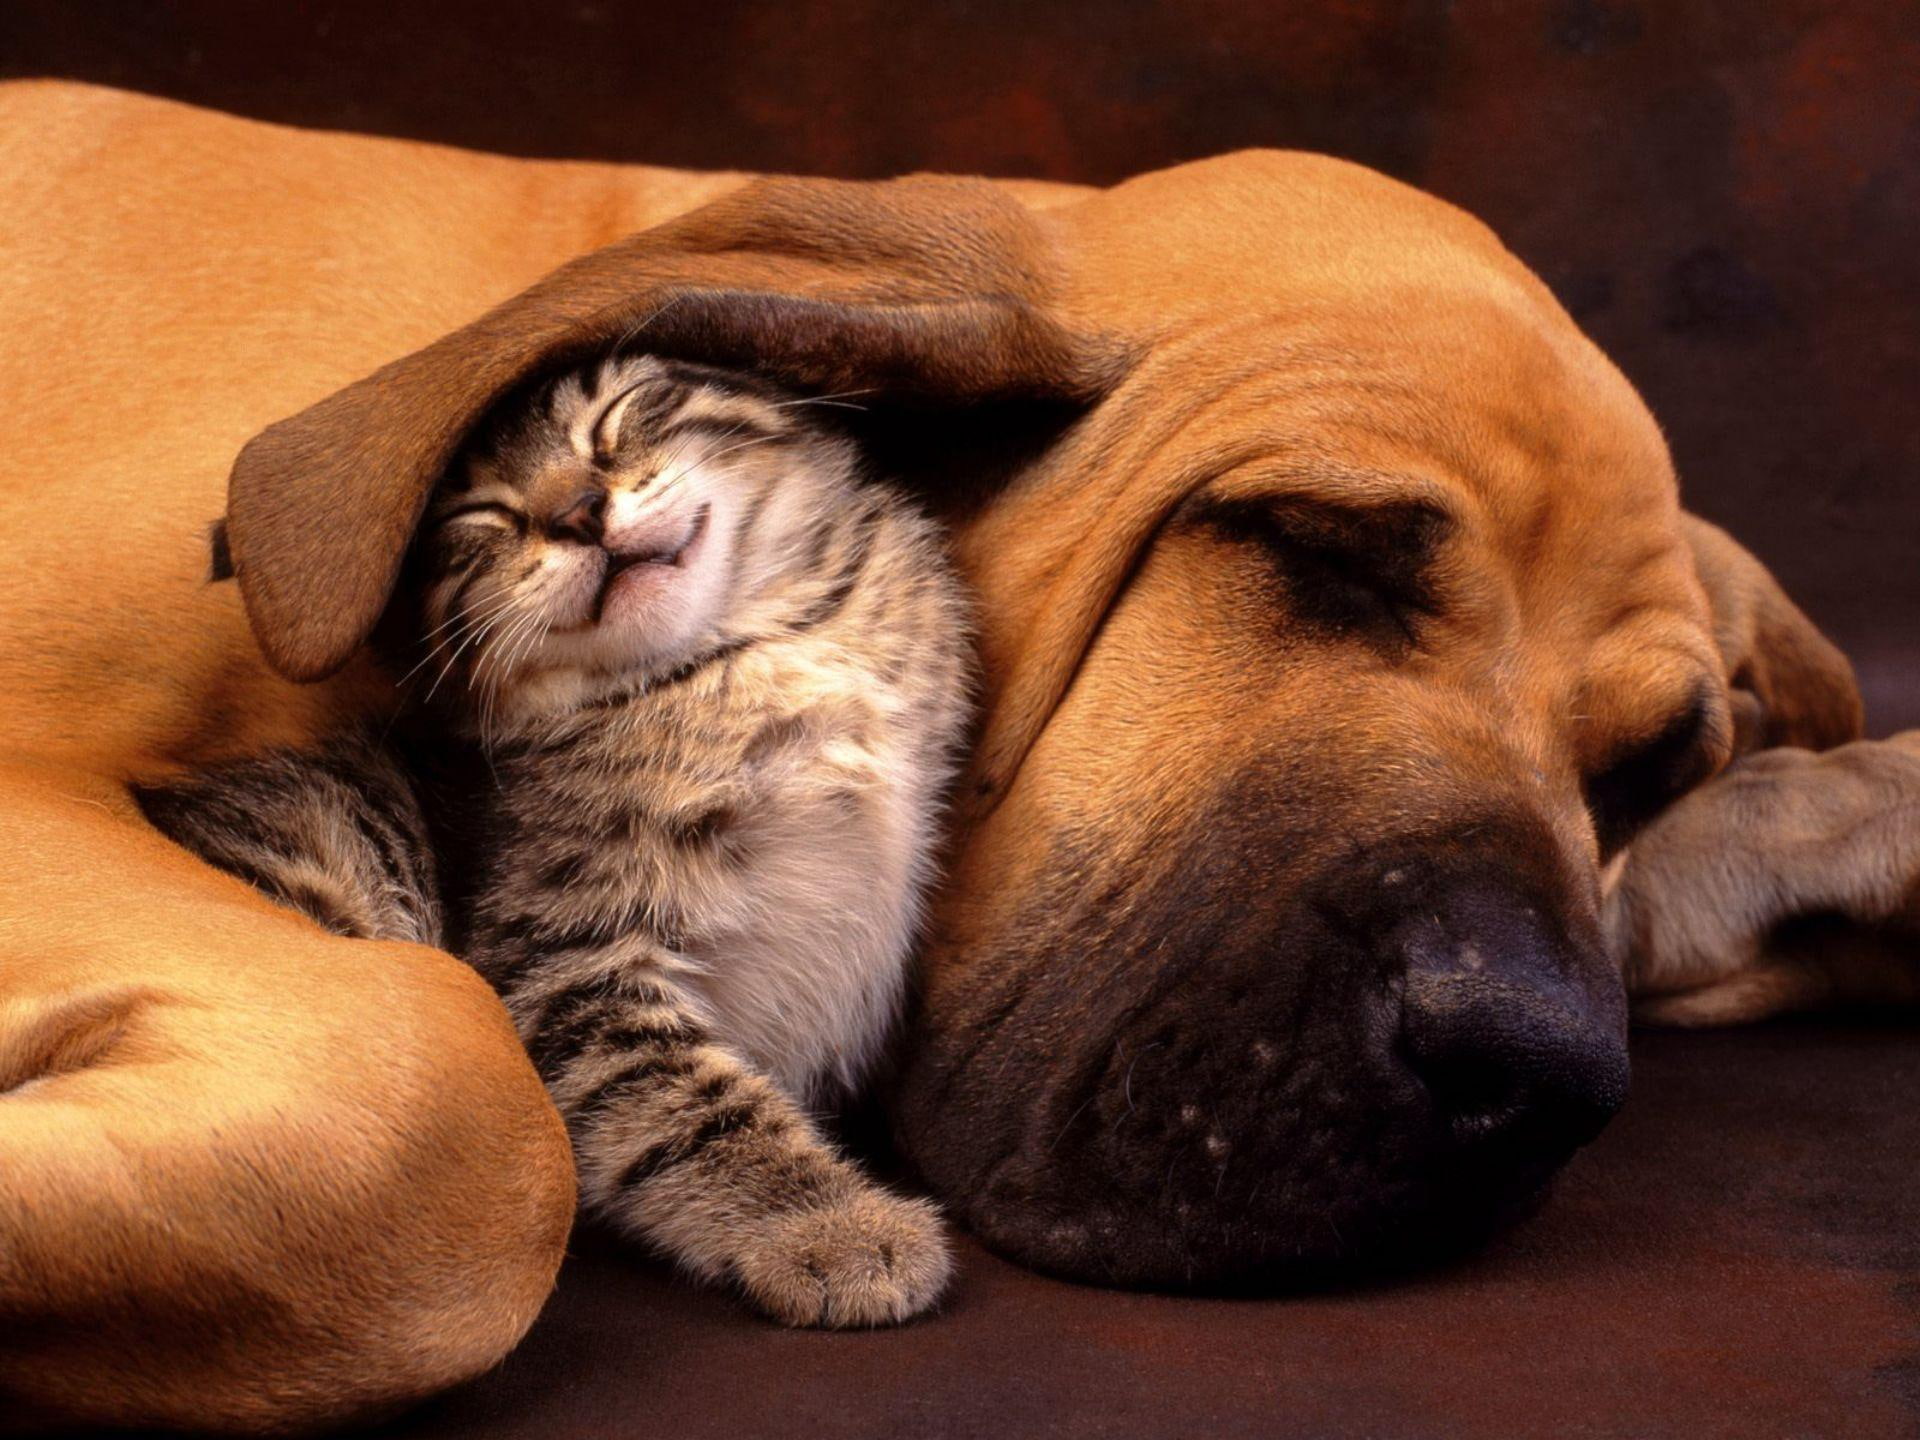 Cat & Dog HD download for free